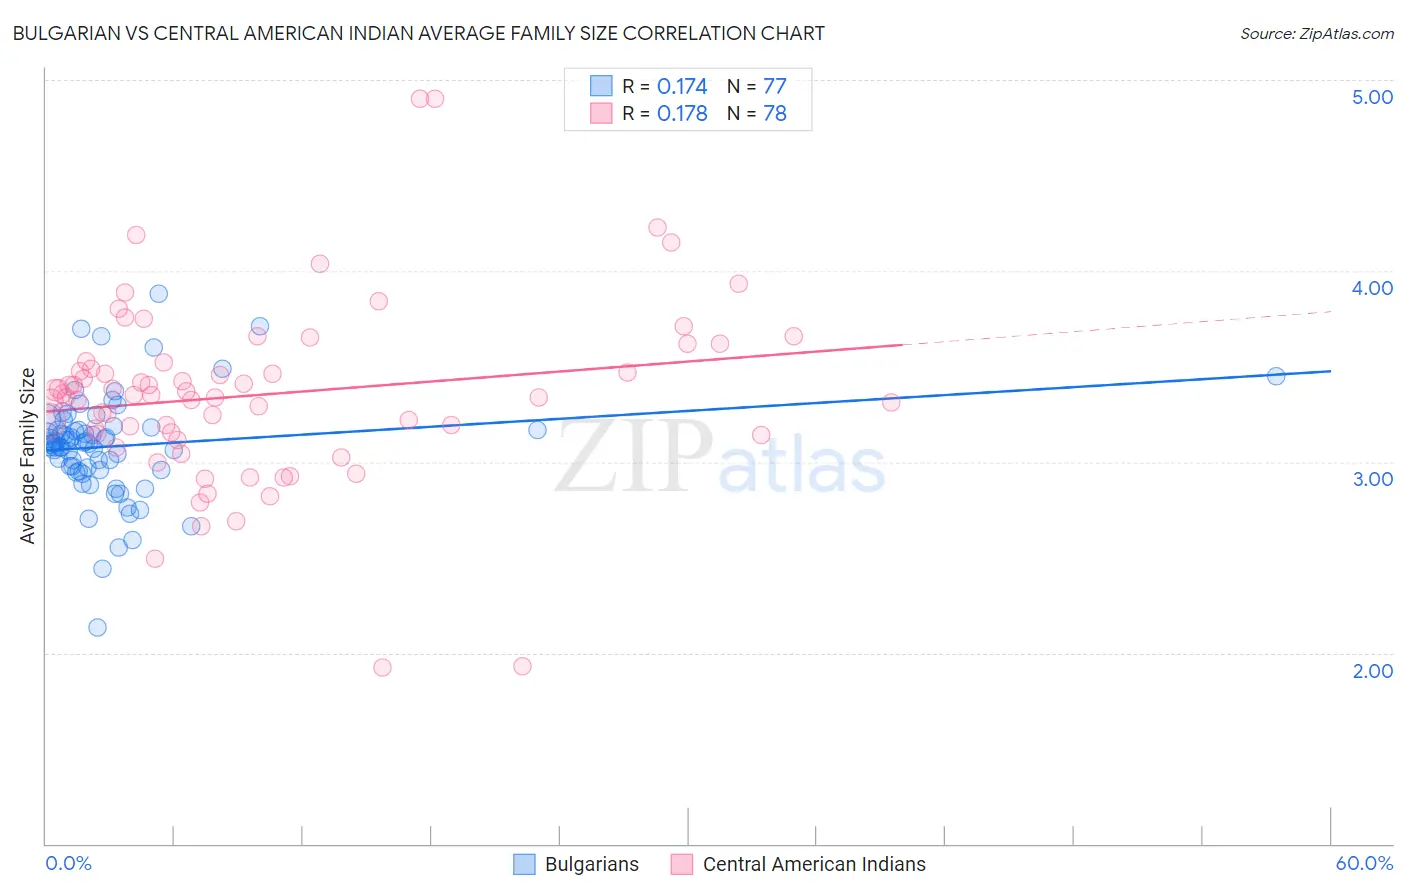 Bulgarian vs Central American Indian Average Family Size